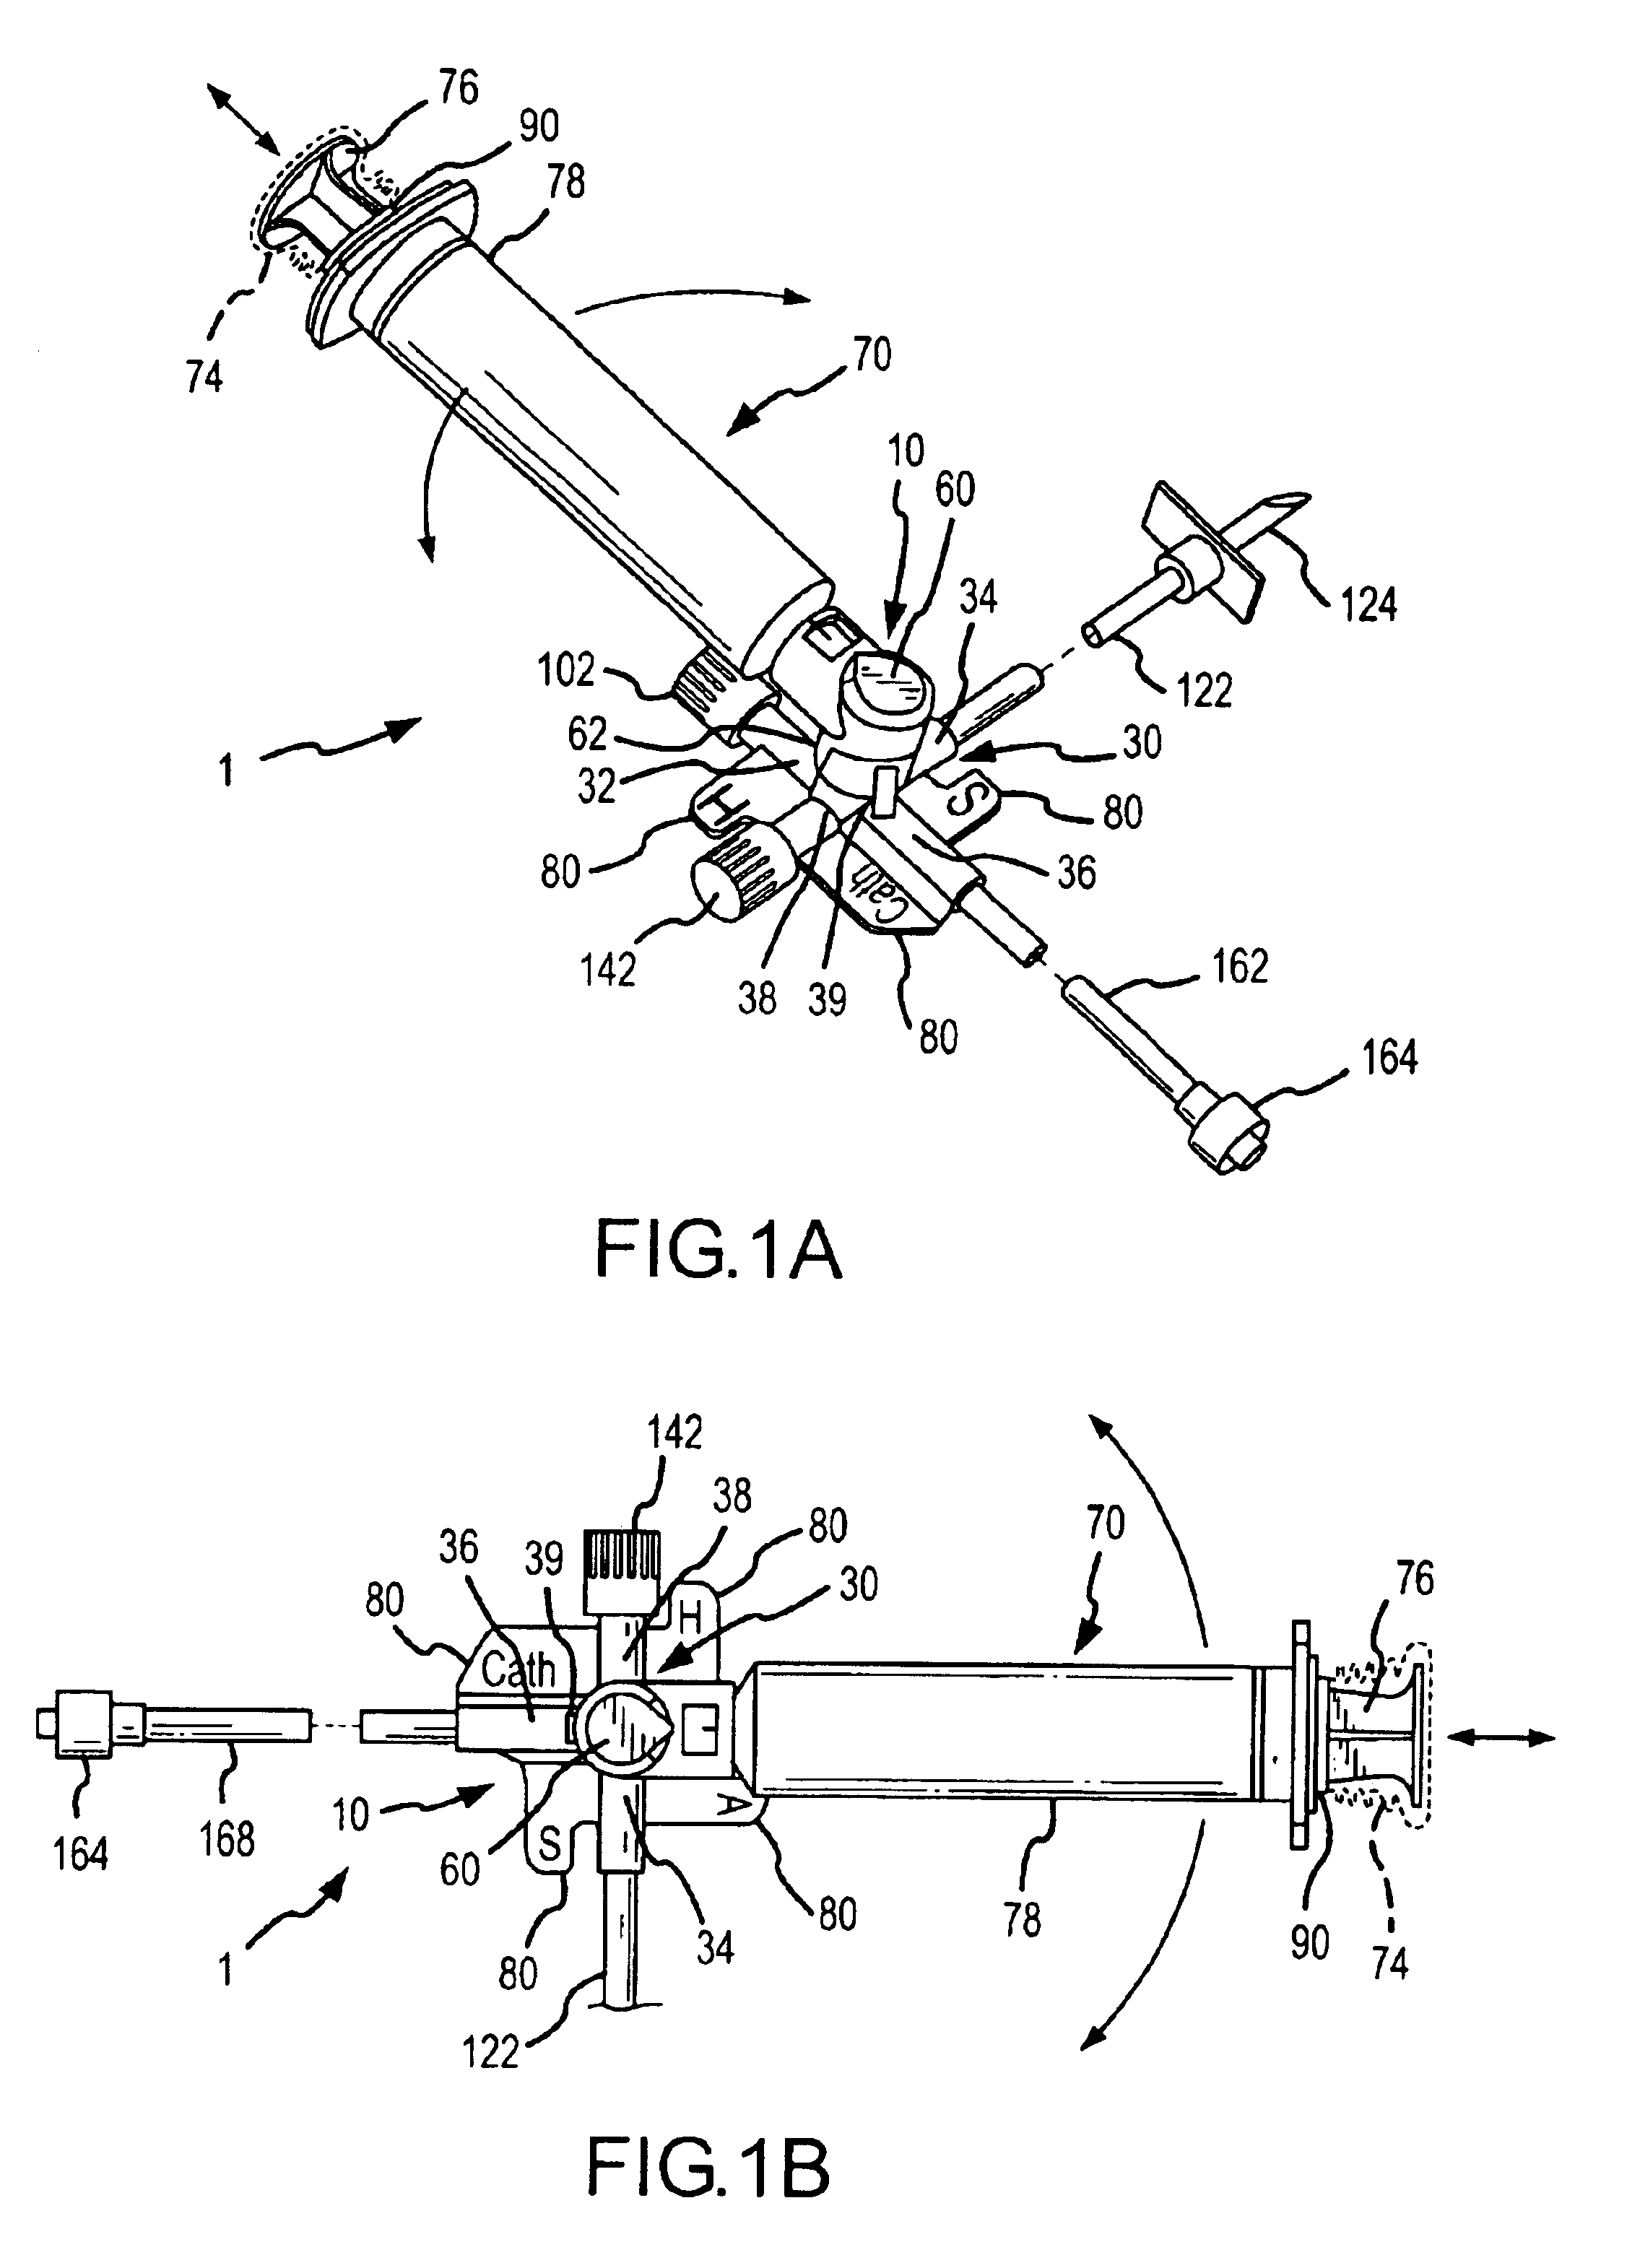 Apparatus and method for administration of IV liquid medication and IV flush solutions